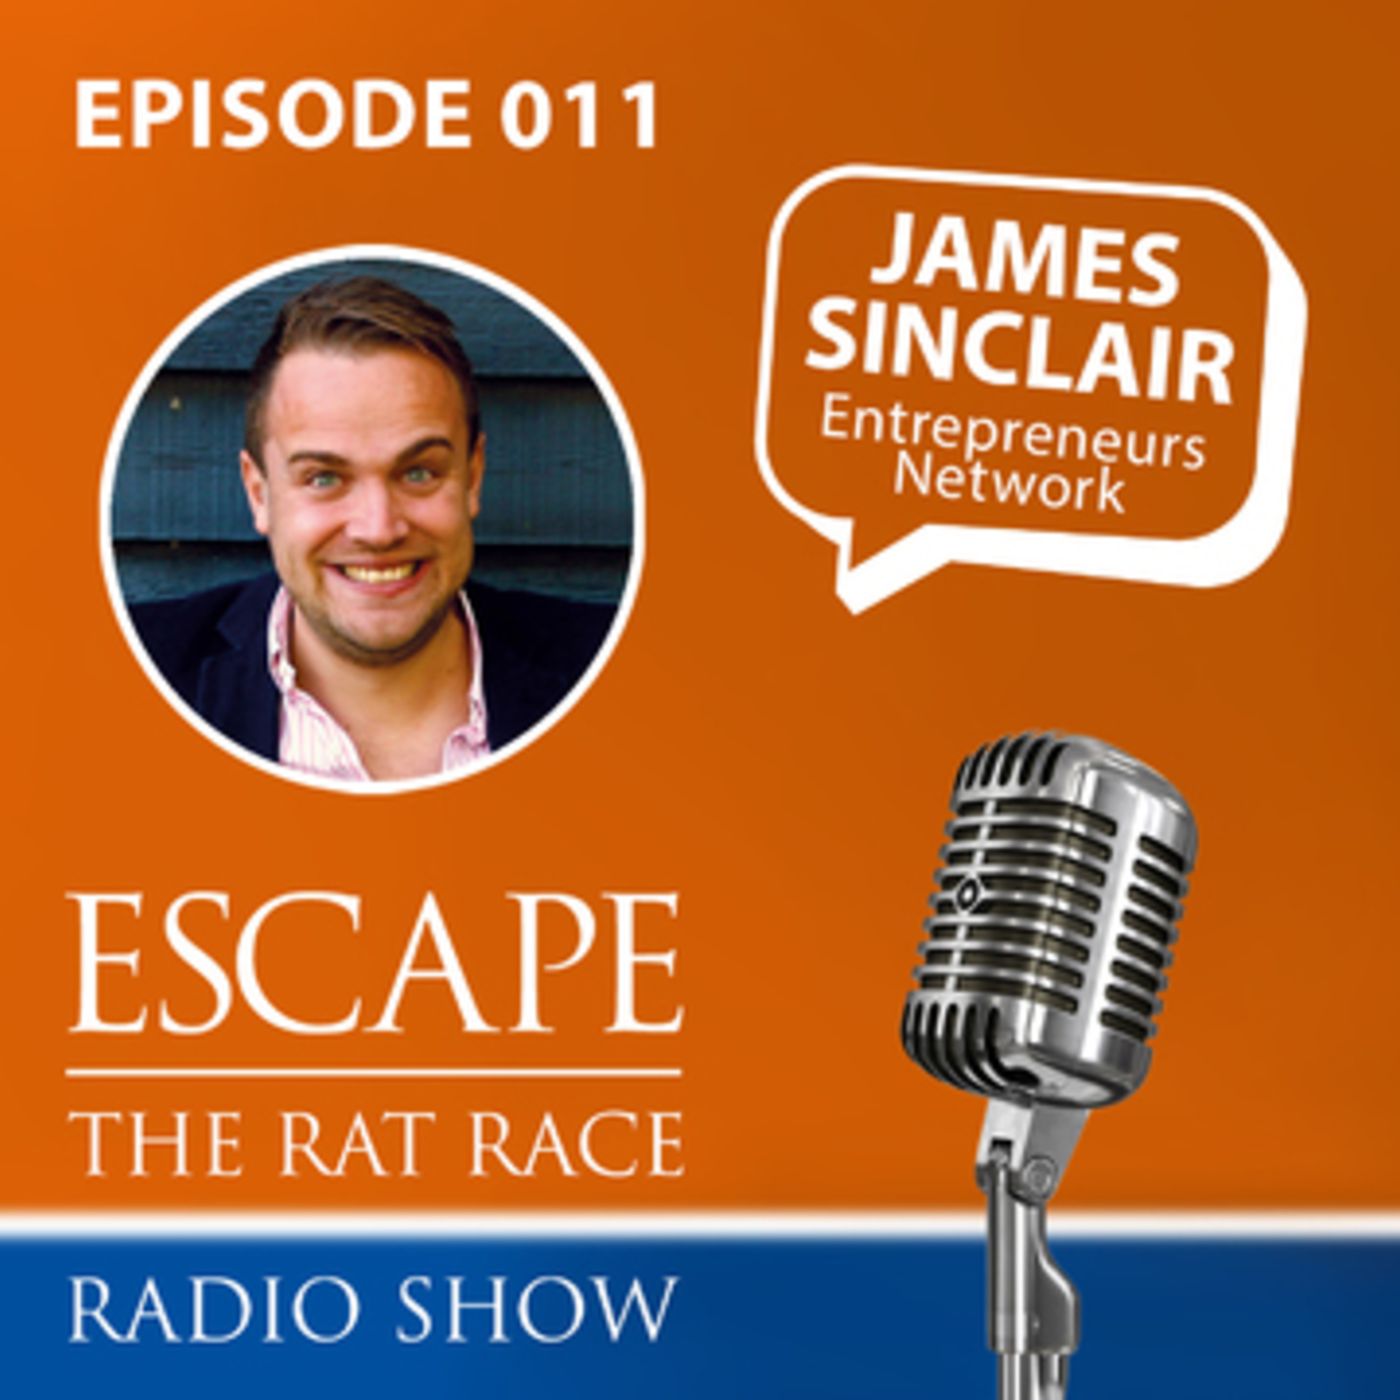 James Sinclair - Rules for making it in business, entrepreneurship and leadership